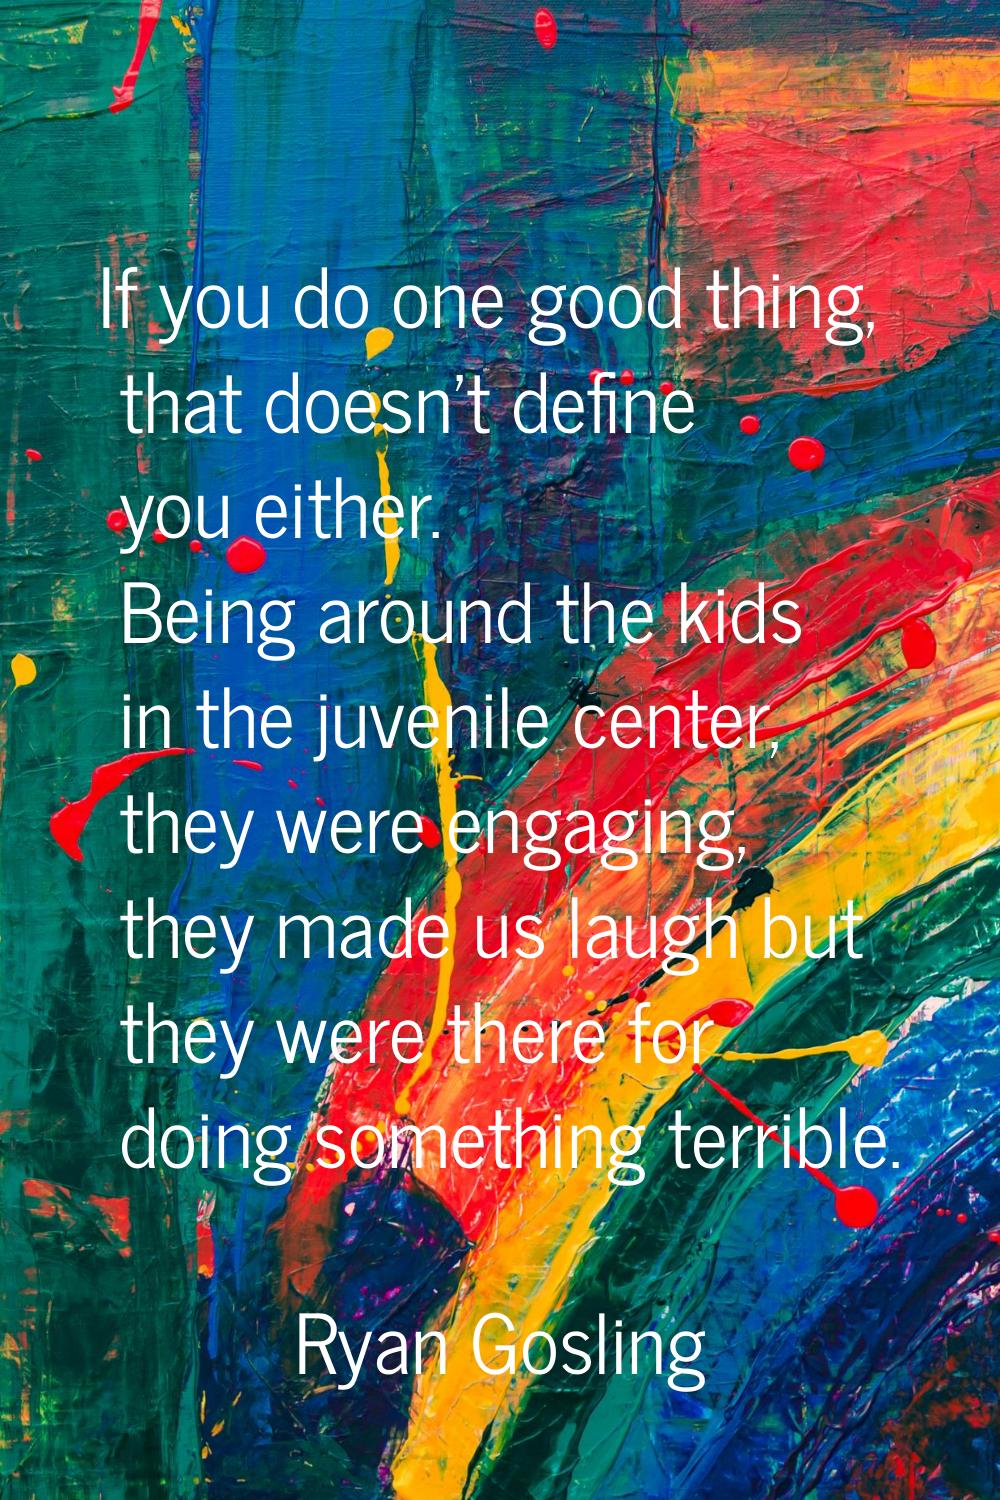 If you do one good thing, that doesn't define you either. Being around the kids in the juvenile cen